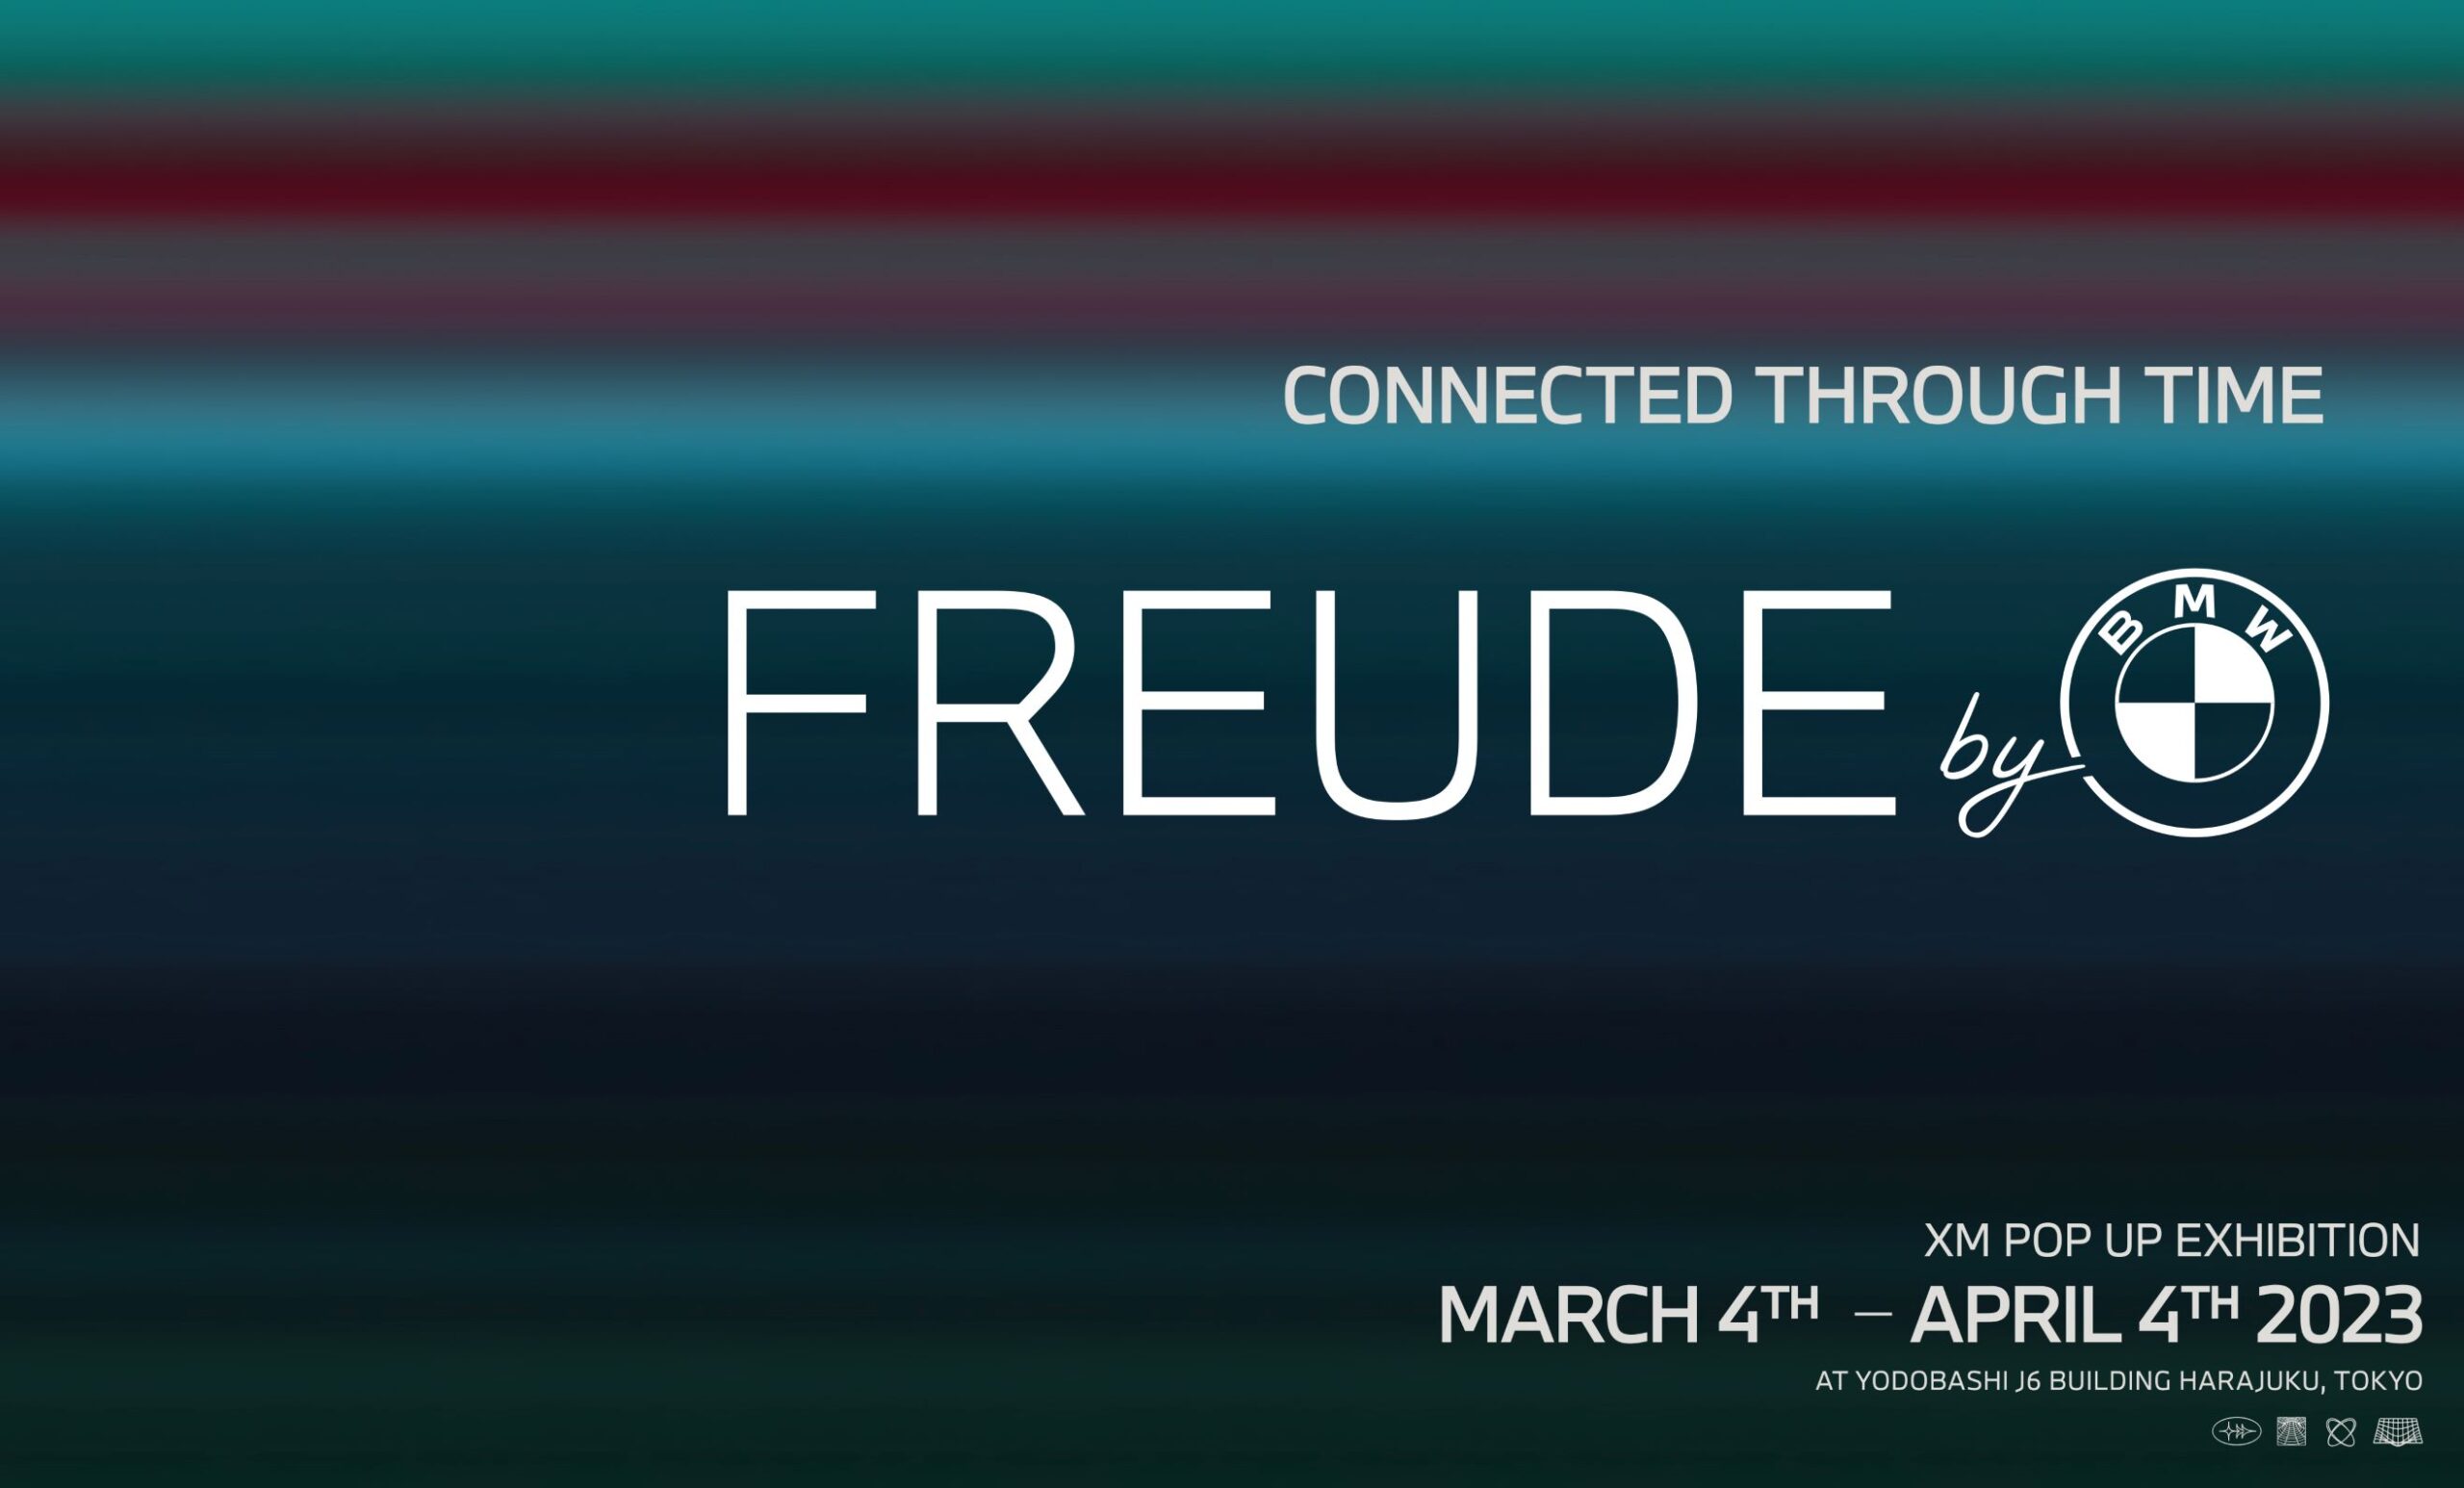 A poster of the 'FREUDE' by BMW pop-up art gallery